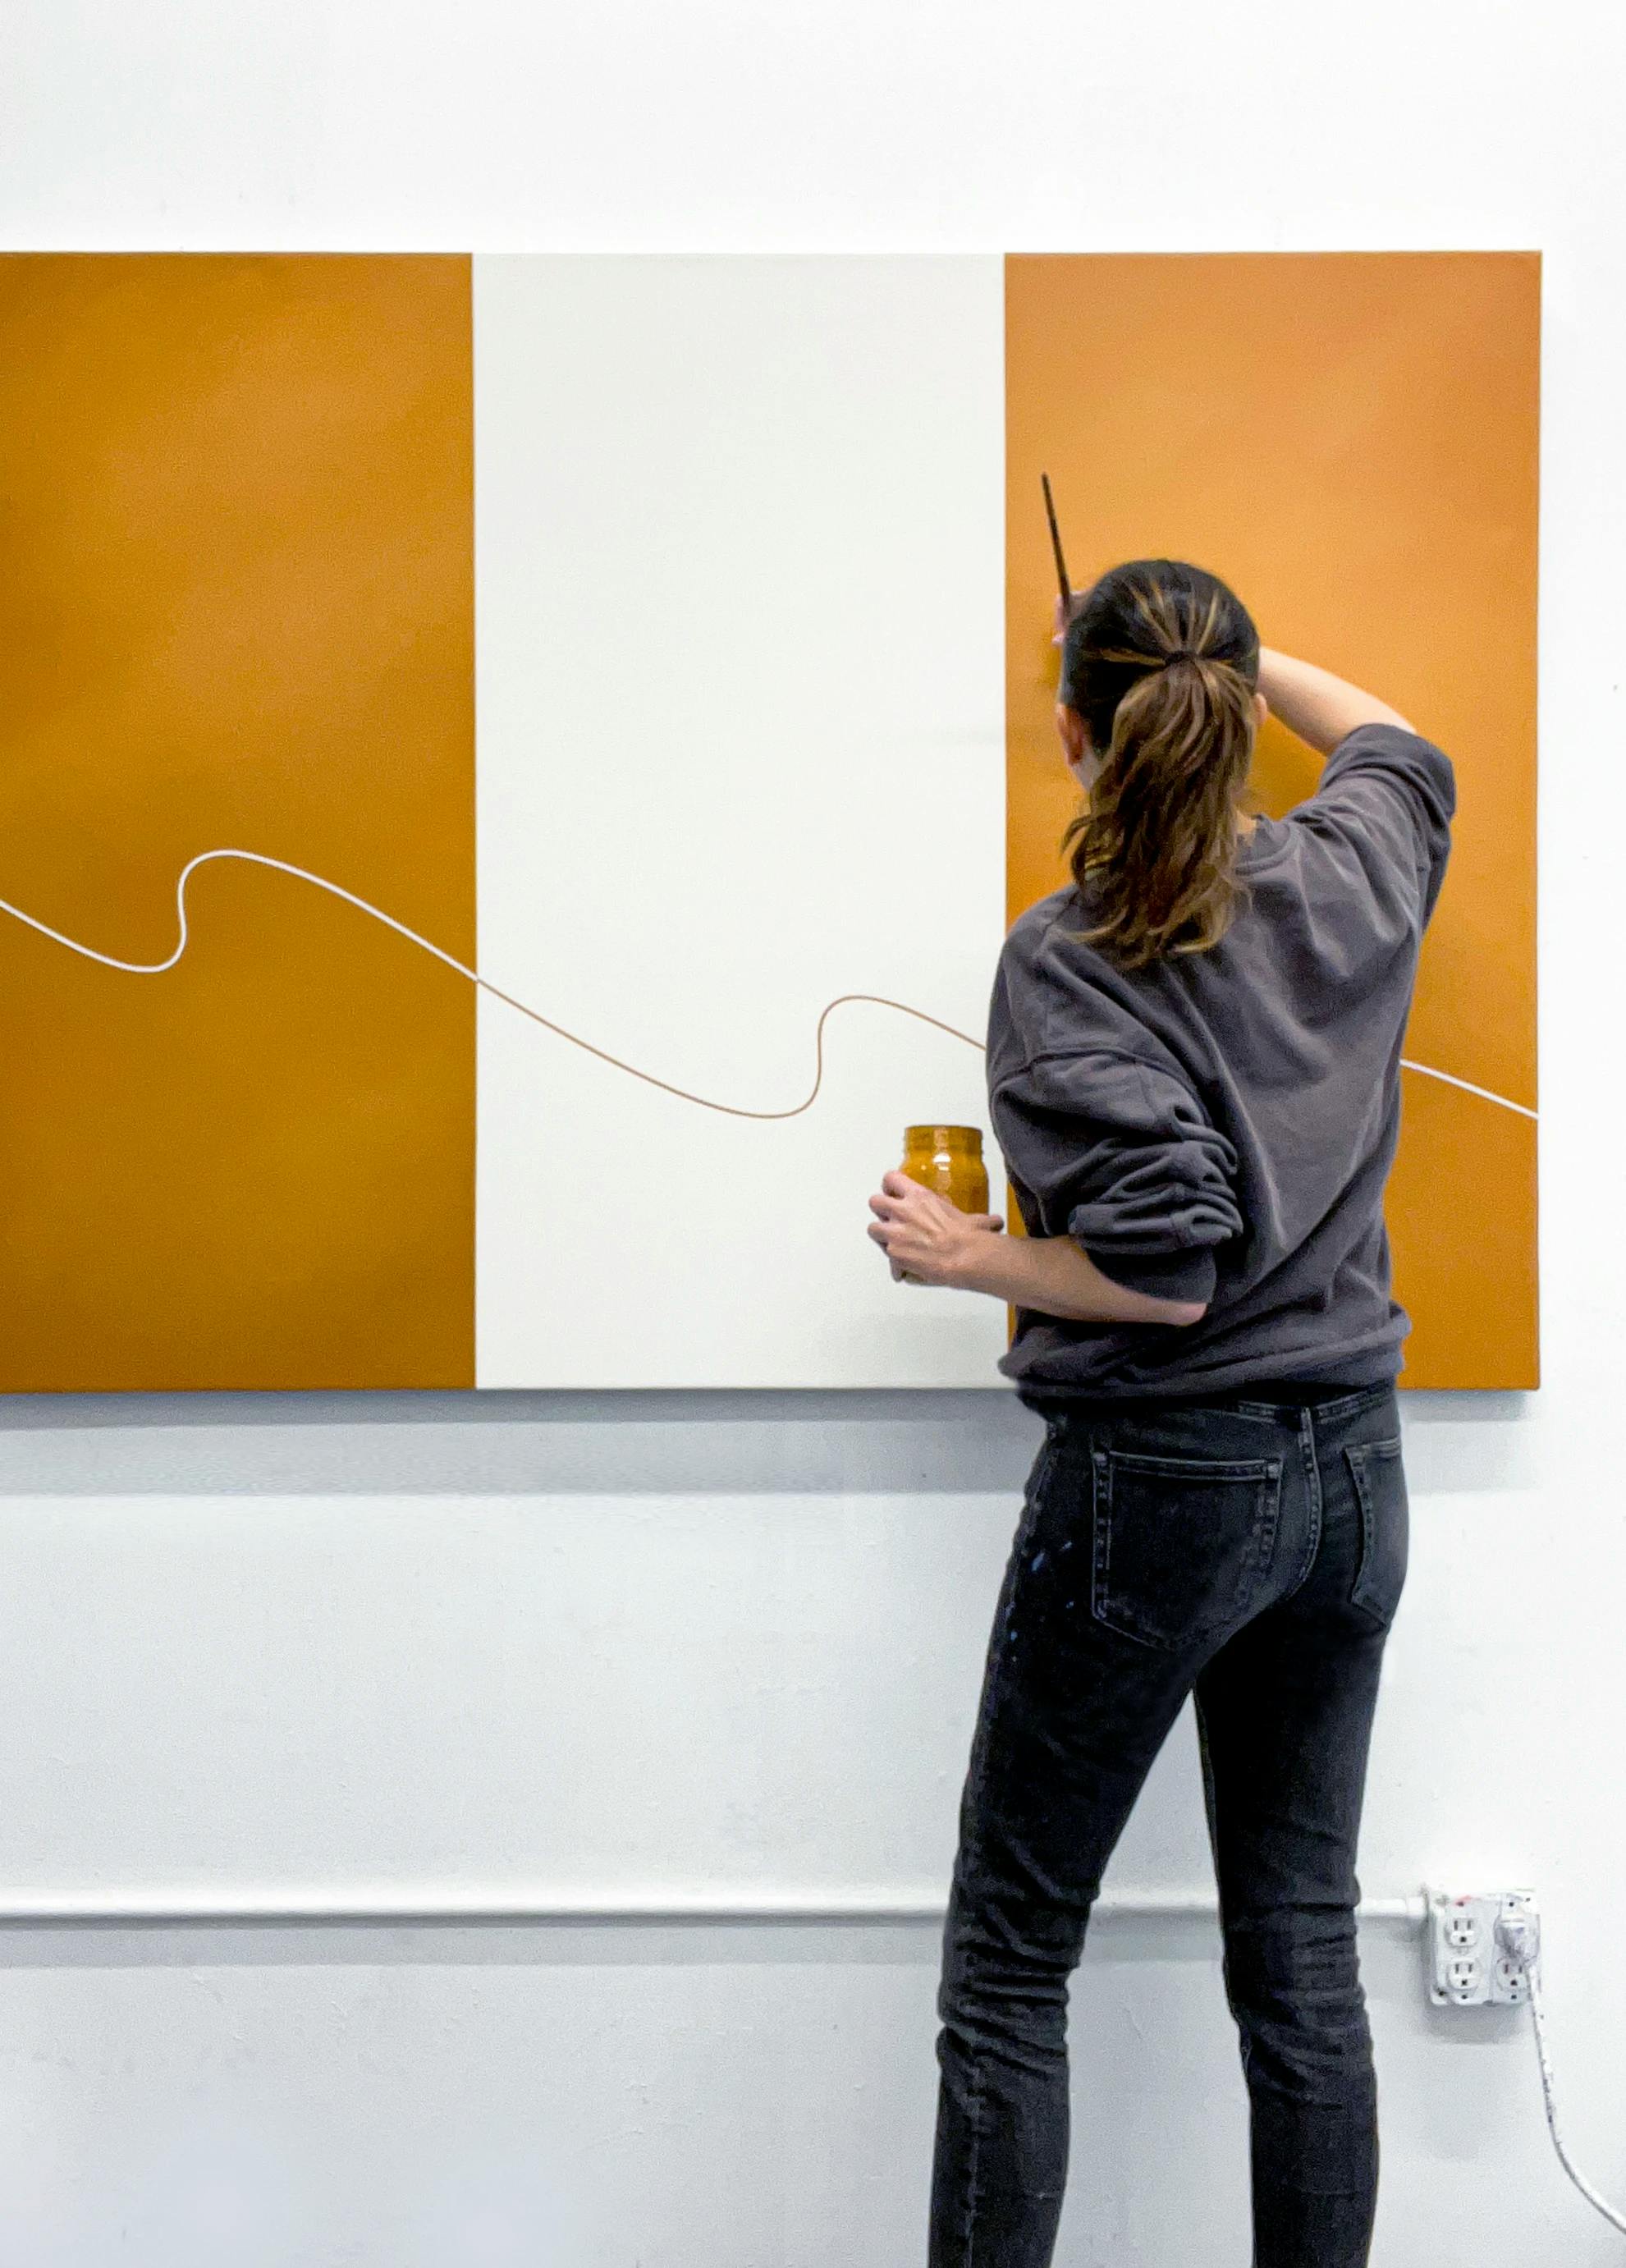 Artist Senem Oezdogan painting on a large, striped orange and white canvas in her studio.